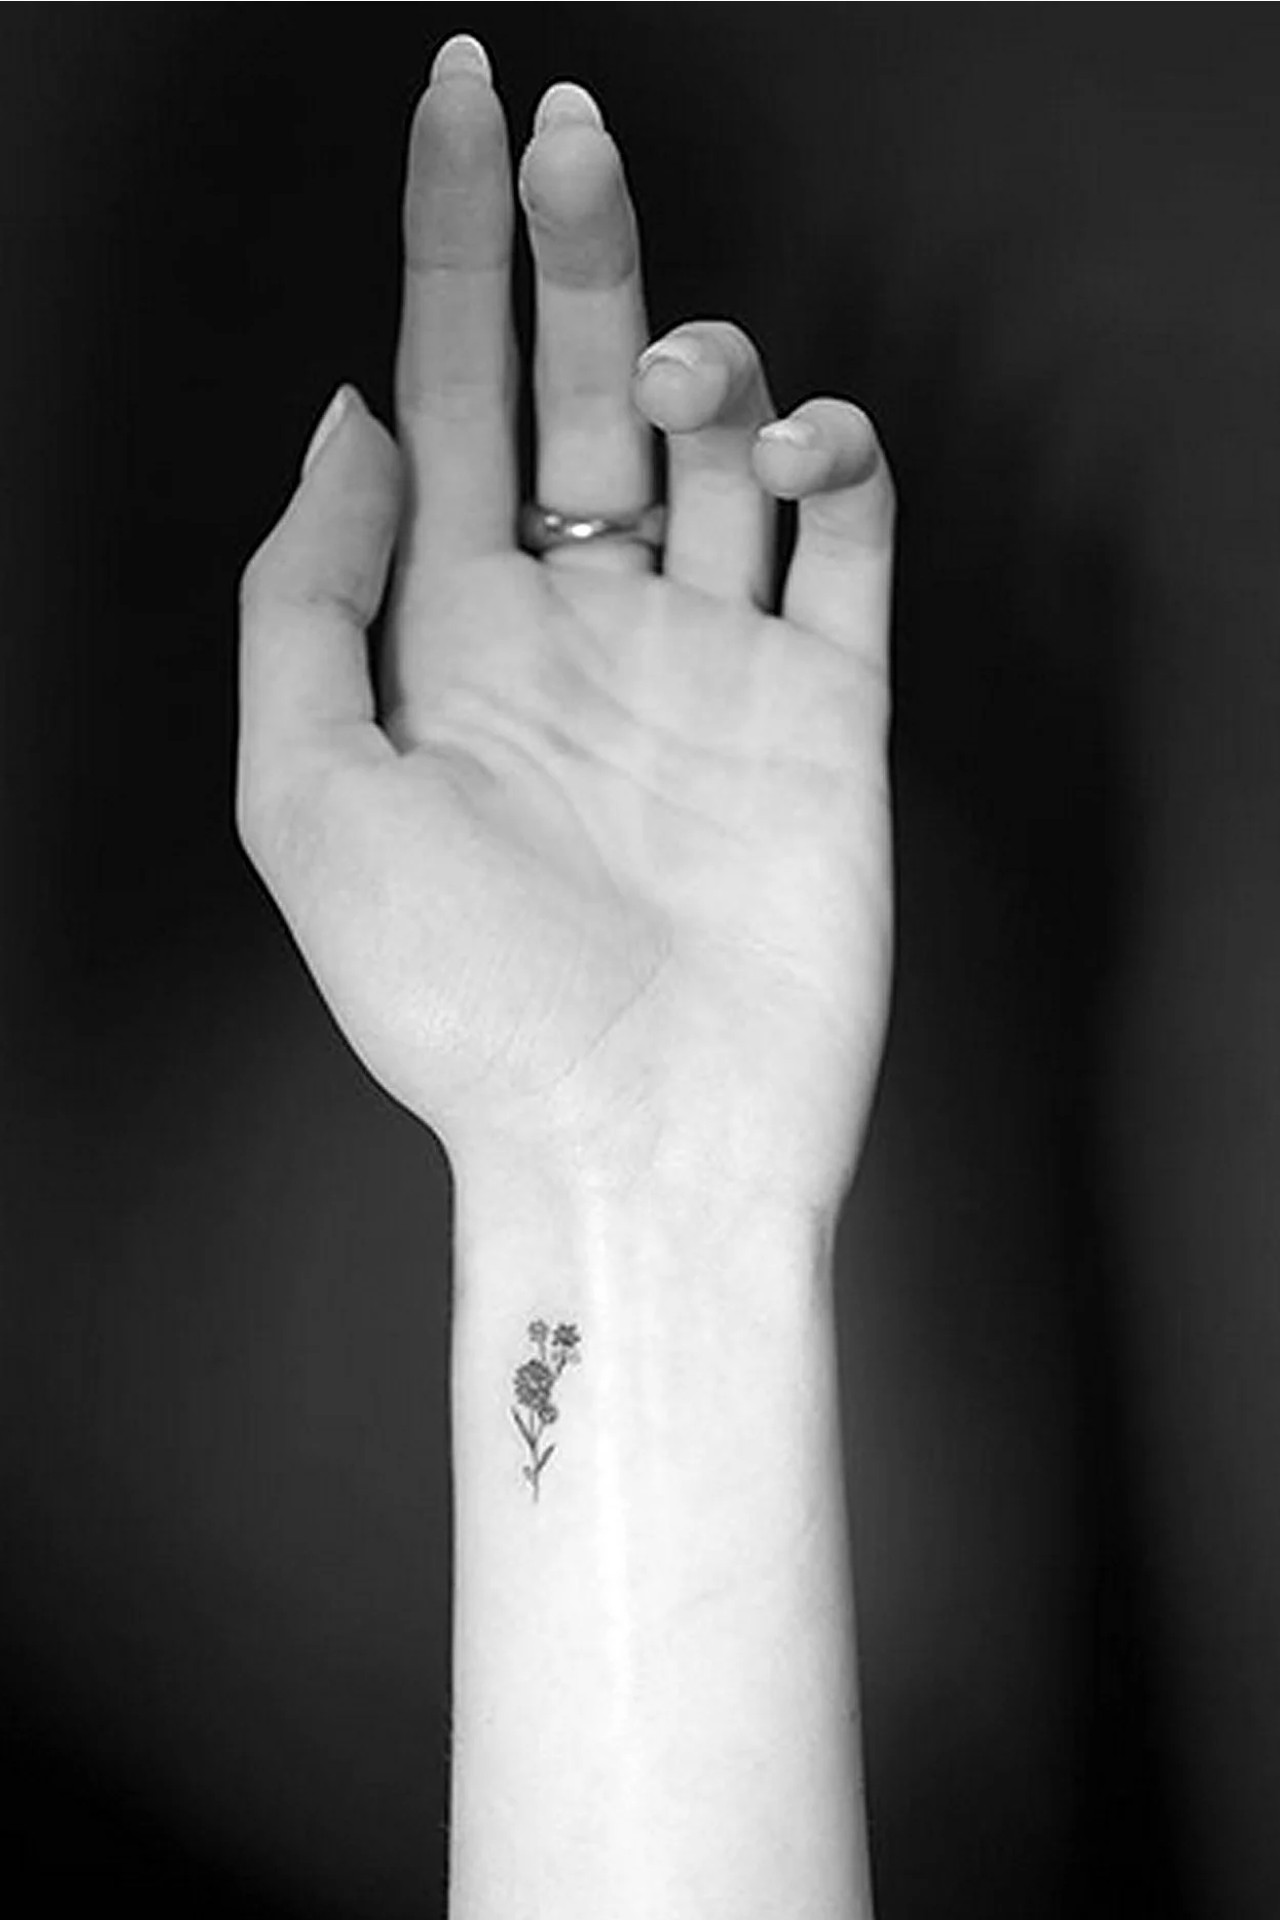 List: 13 Dainty And Meaningful Self-love Tattoos Design Ideas | Preview.ph